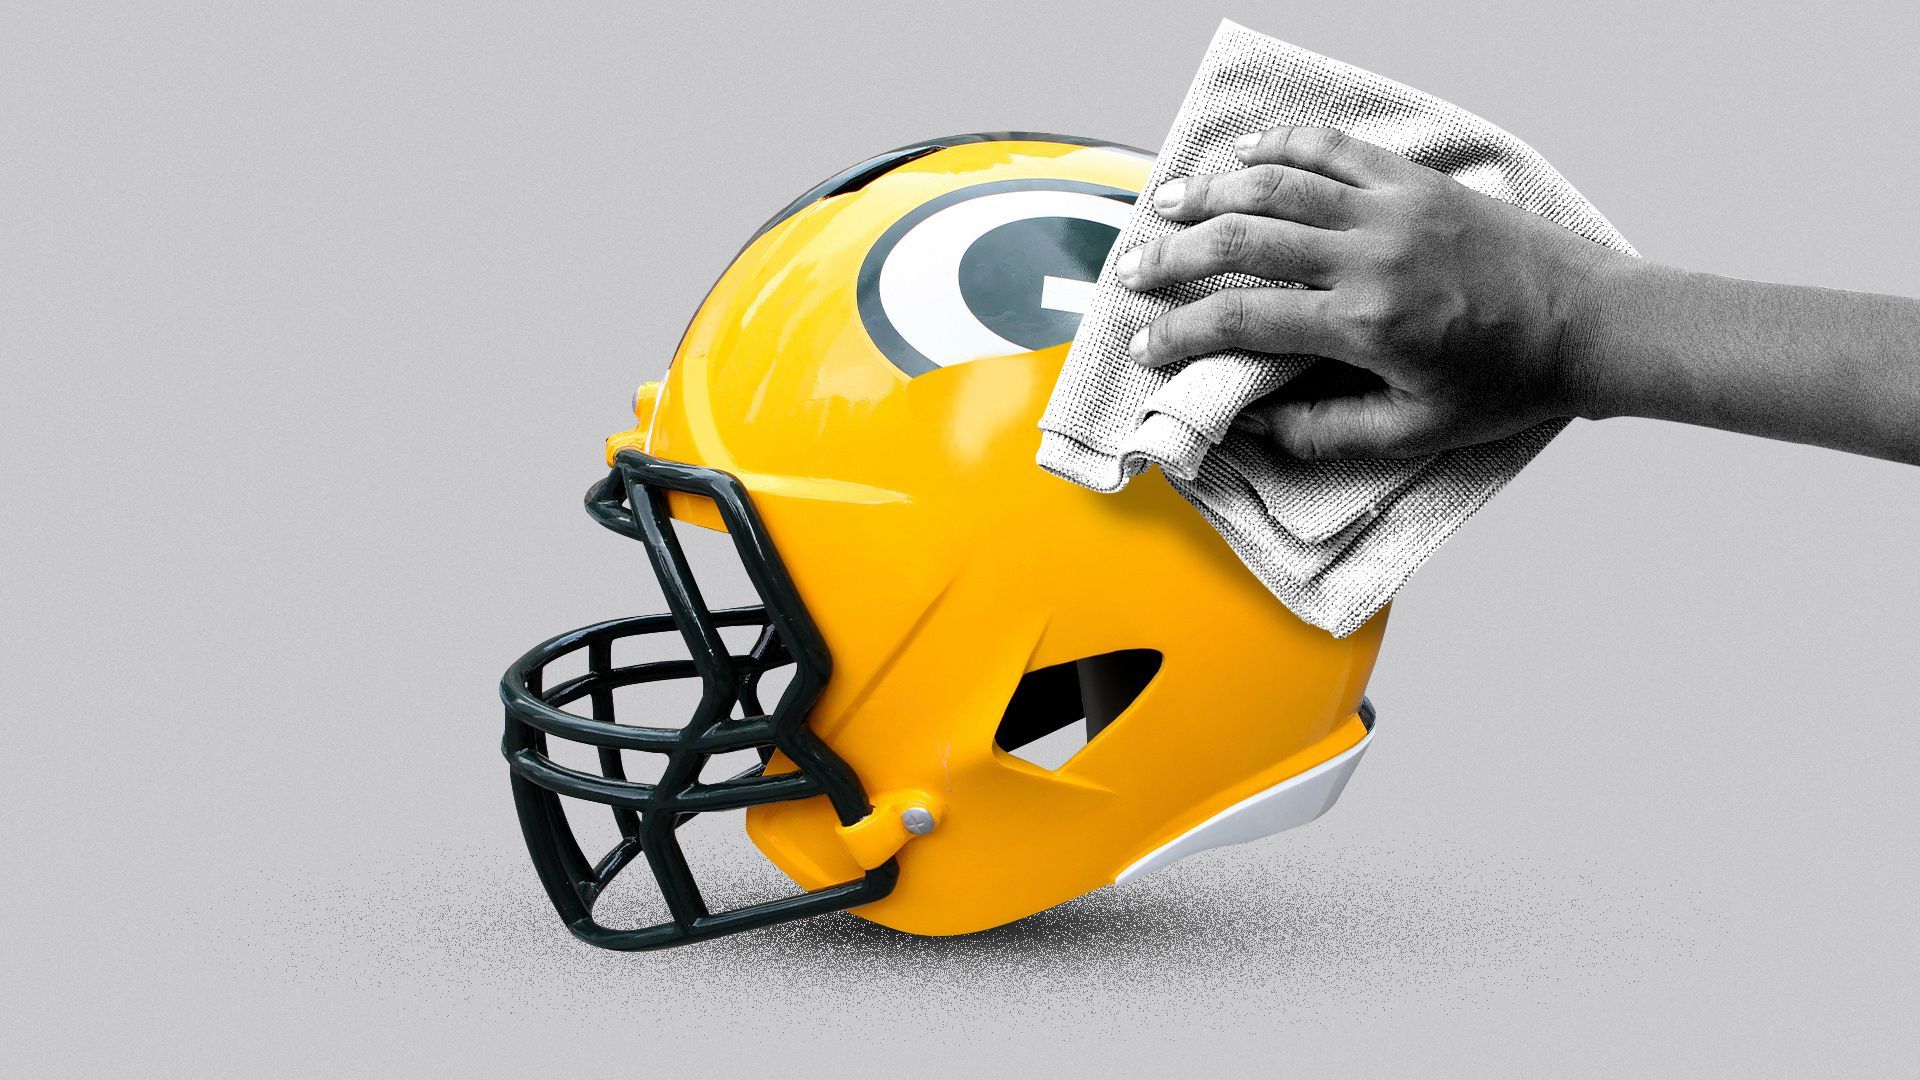 Illustration of a hand wiping the Packers' logo off of a football helmet